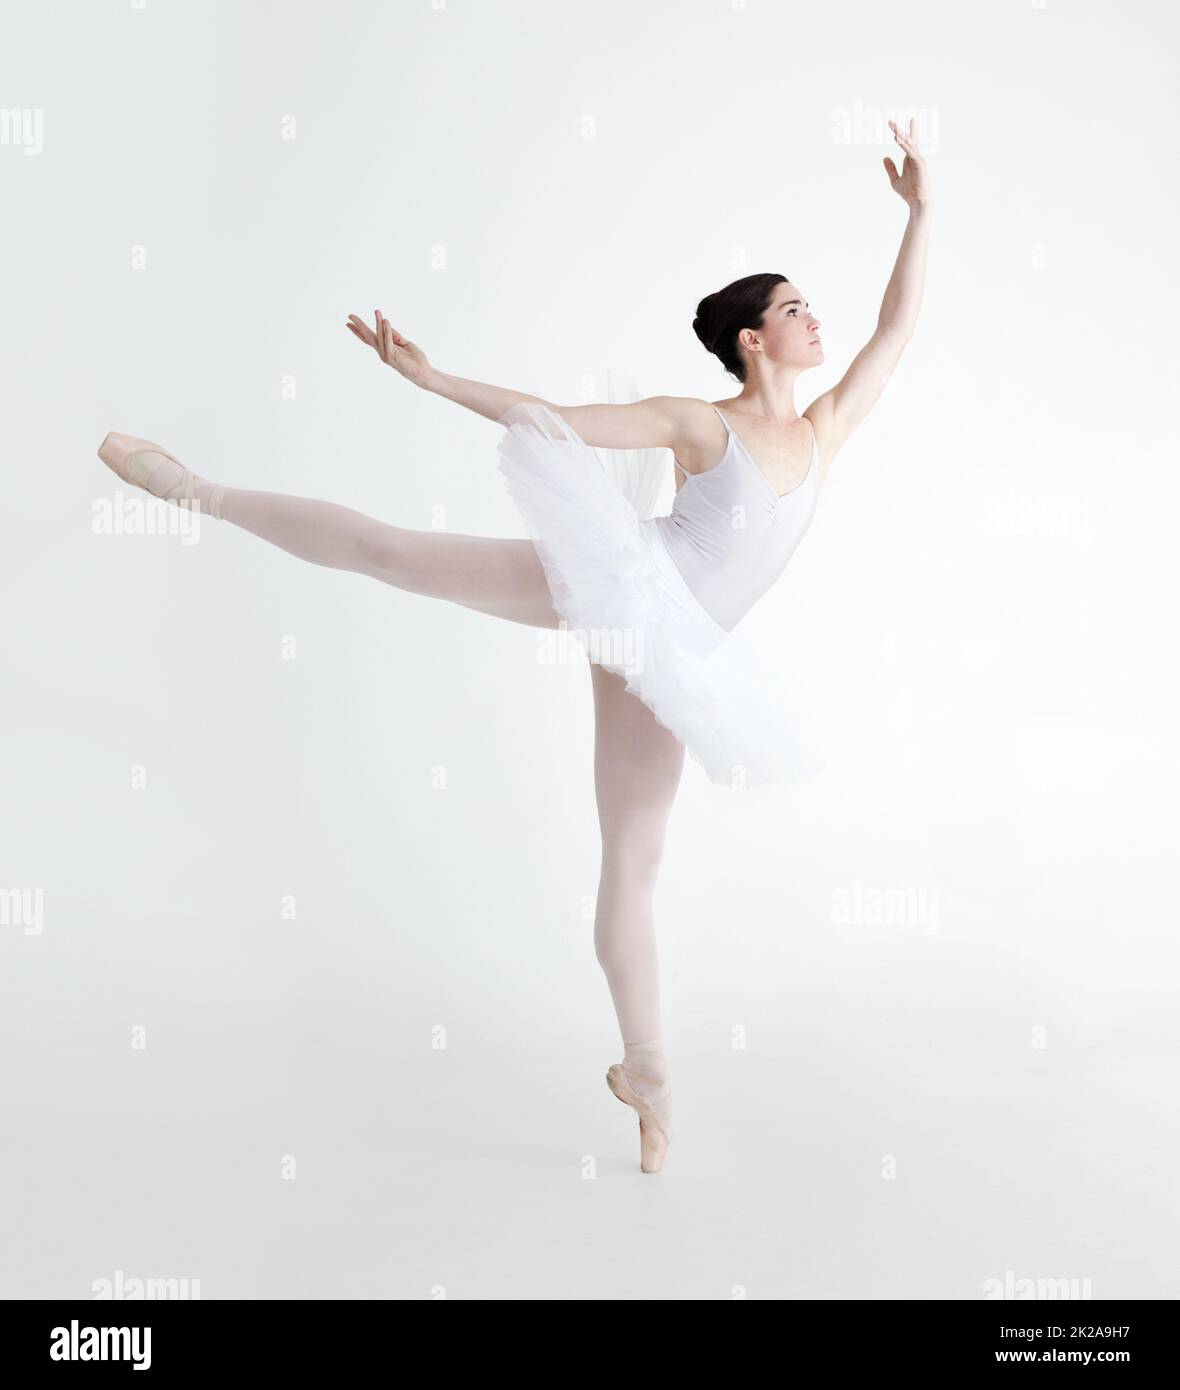 Perfect arabesque. Elegant young ballerina dancing en pointe against a white background. Stock Photo